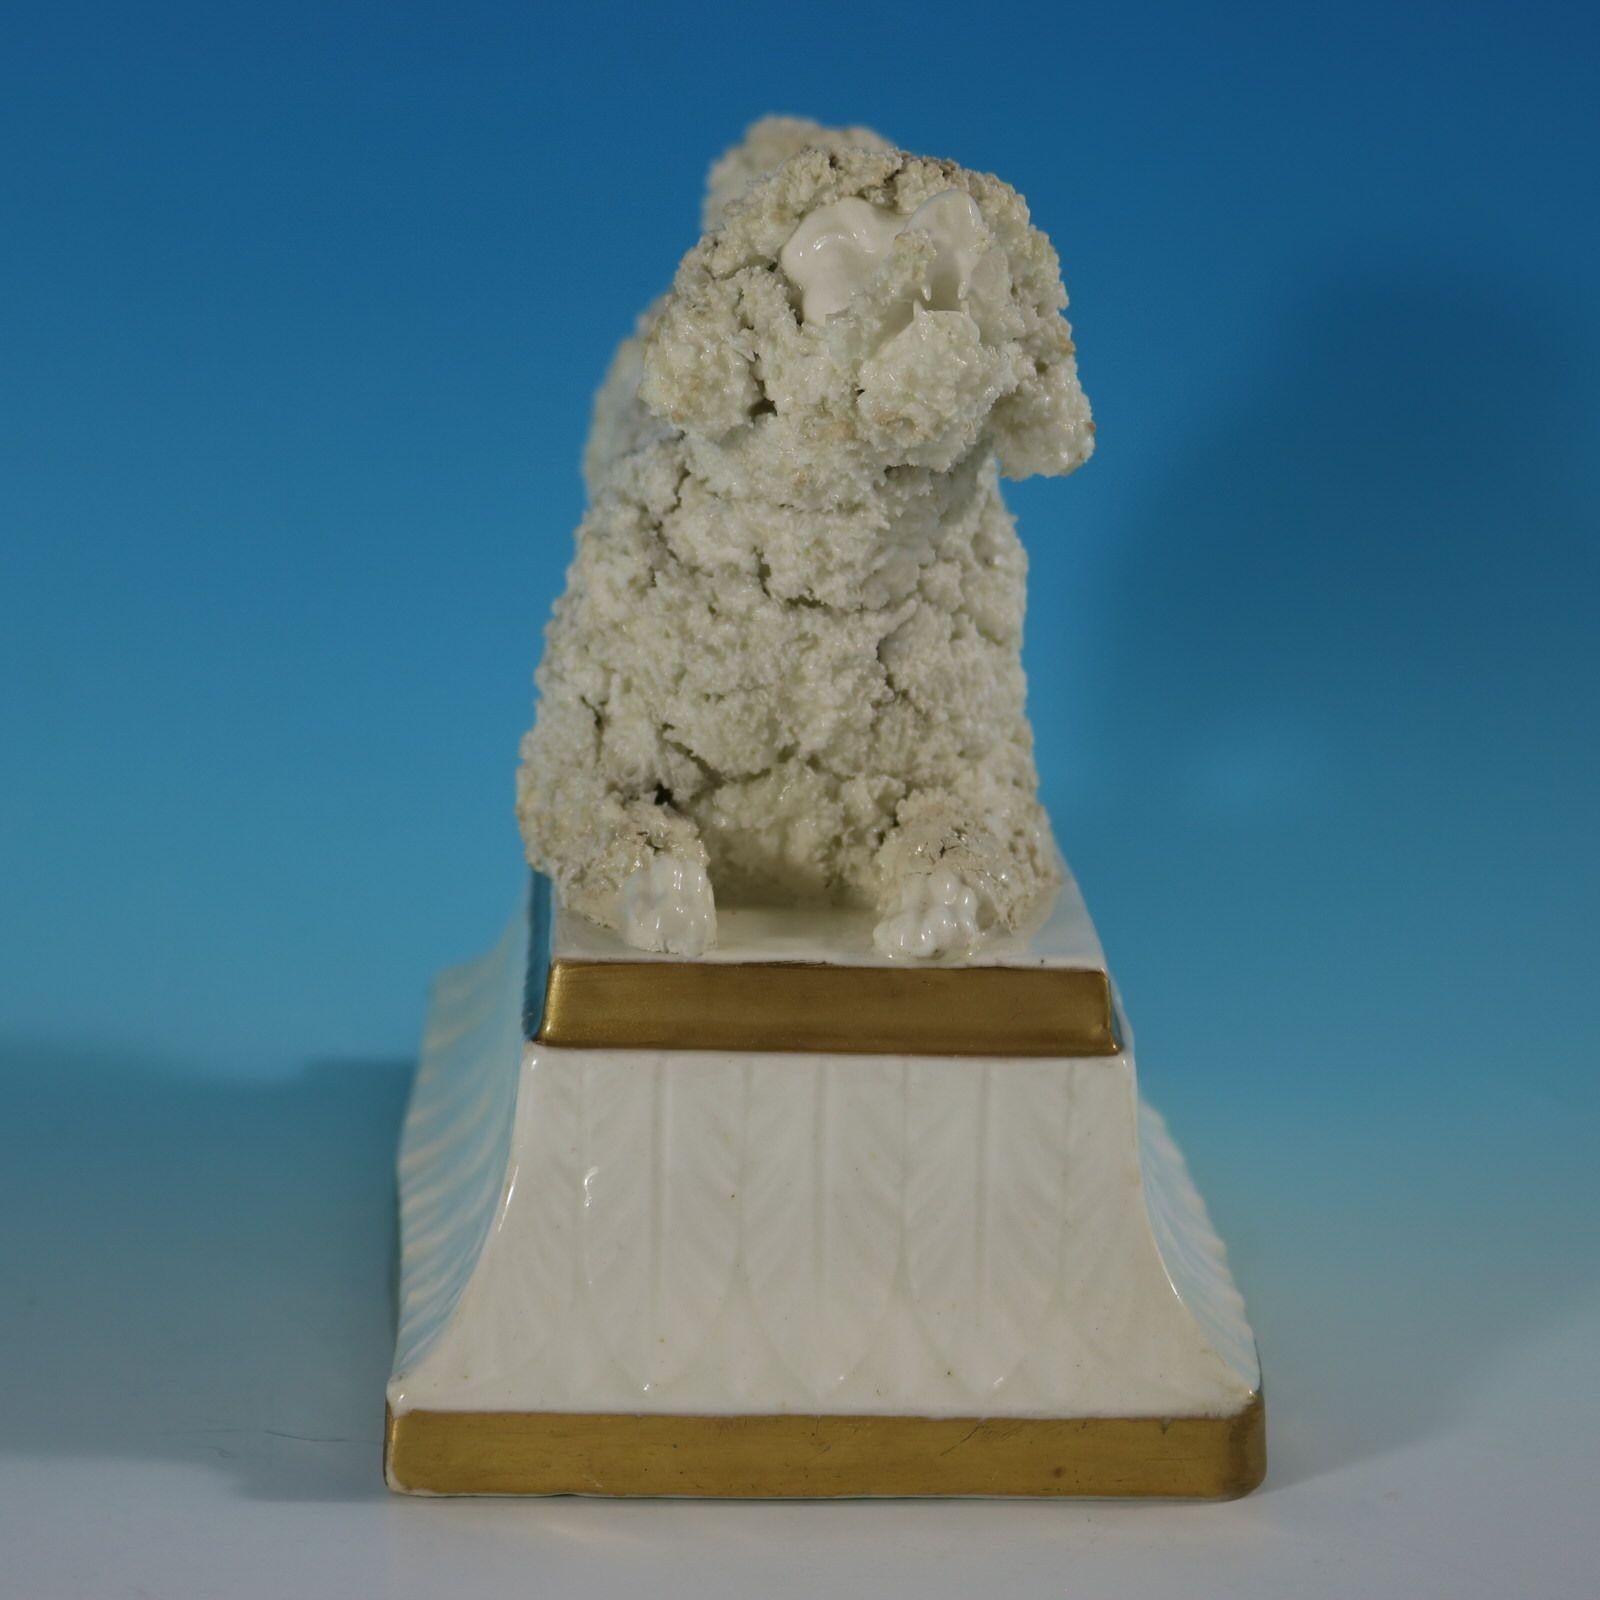 Large Staffordshire Pottery Porcellaneous Poodle In Fair Condition For Sale In Chelmsford, Essex